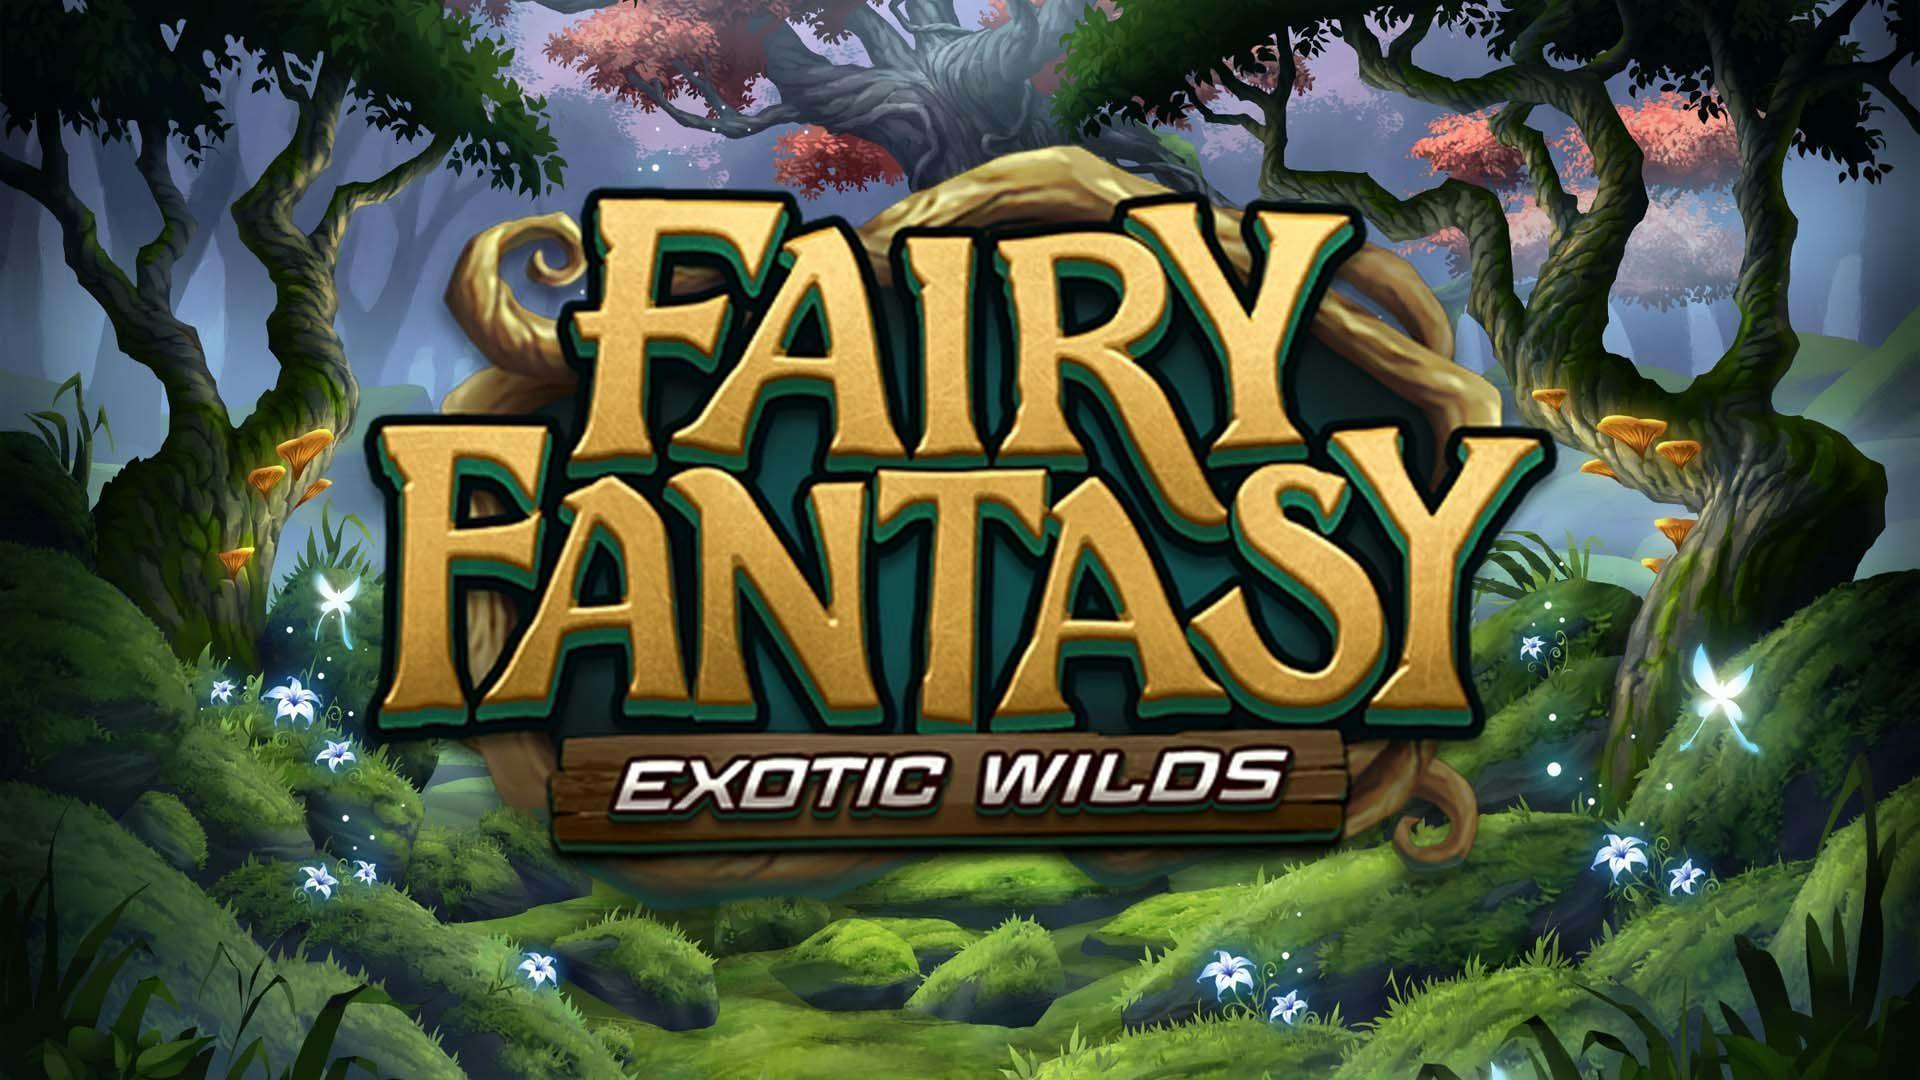 Fairy Fantasy Exotic Wilds Slot Machine Online Free Game Play